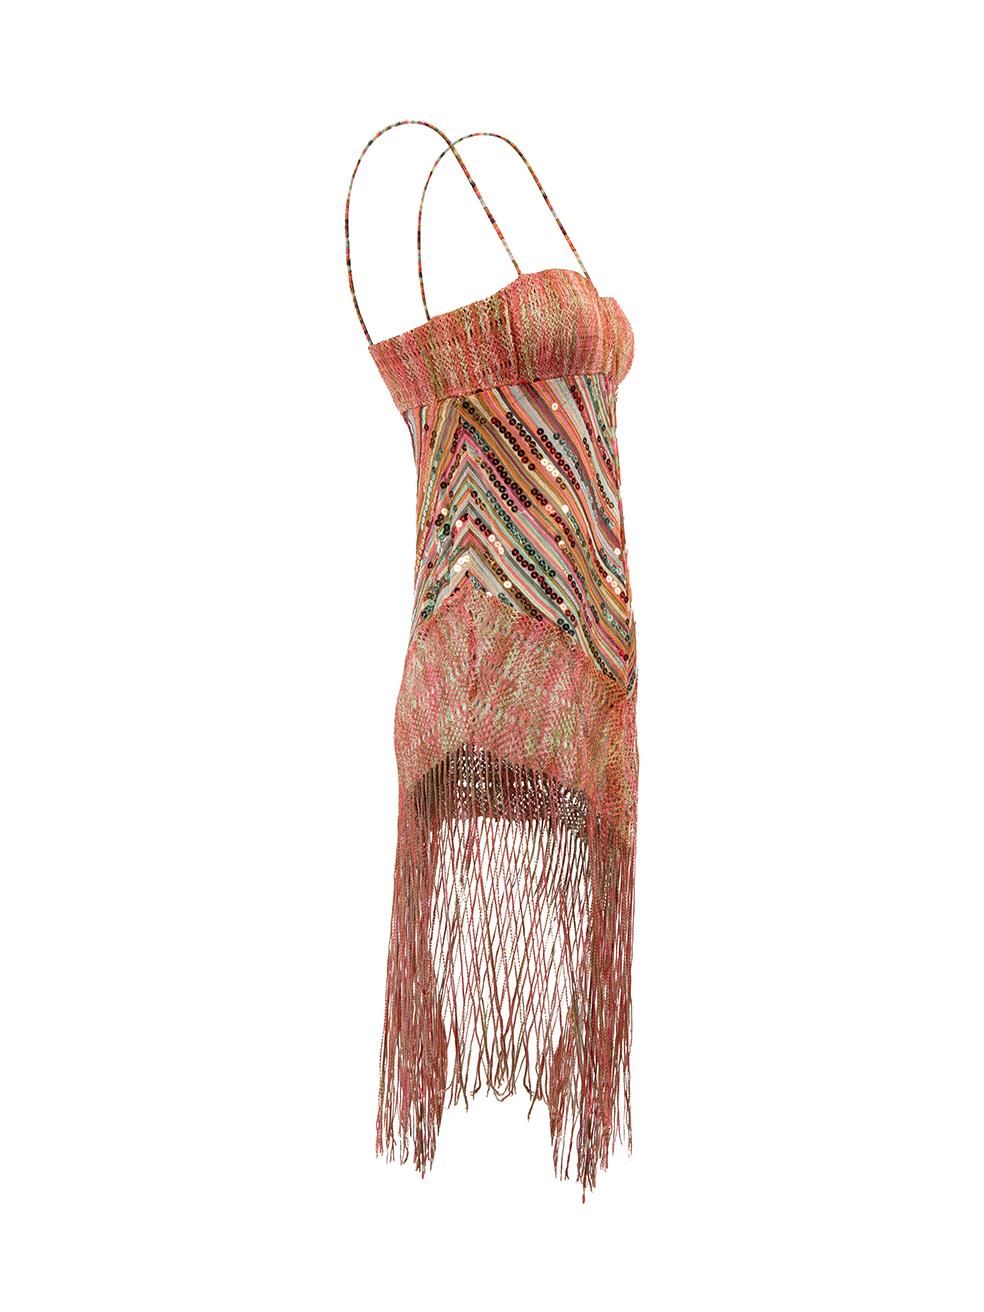 CONDITION is Never Worn. No visible wear to top is evident on this used Missoni designer resale item. Details Multicolour Feels like viscose Built in bustier with 4 clasp fastening Sequinned details Spaghetti straps Square neck Fringed hem Made in